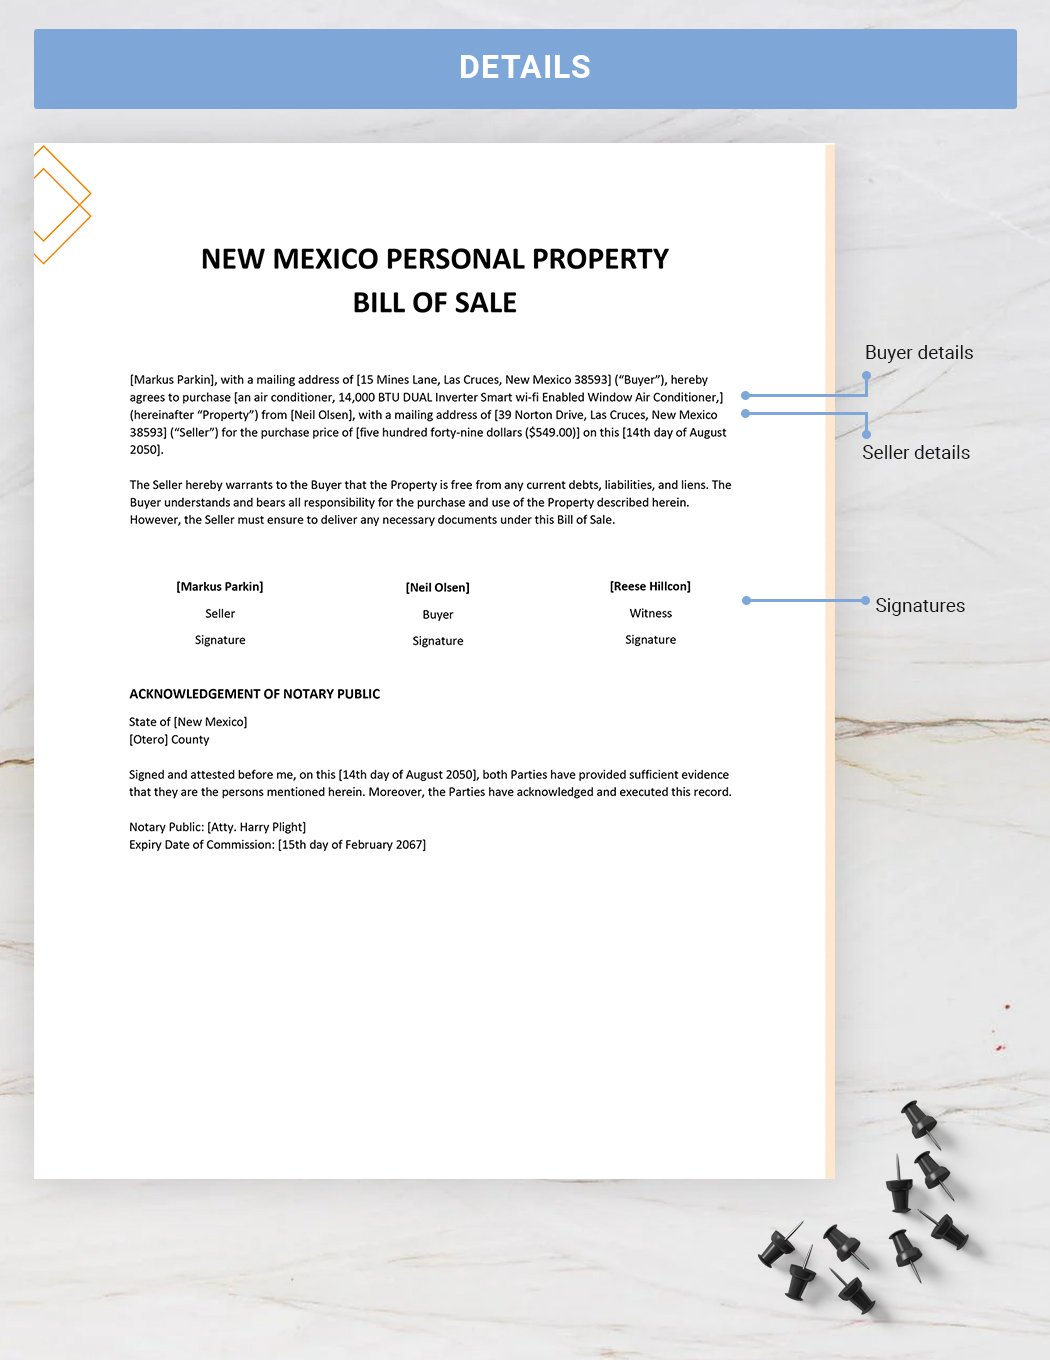 New Mexico Personal Property Bill of Sale Template